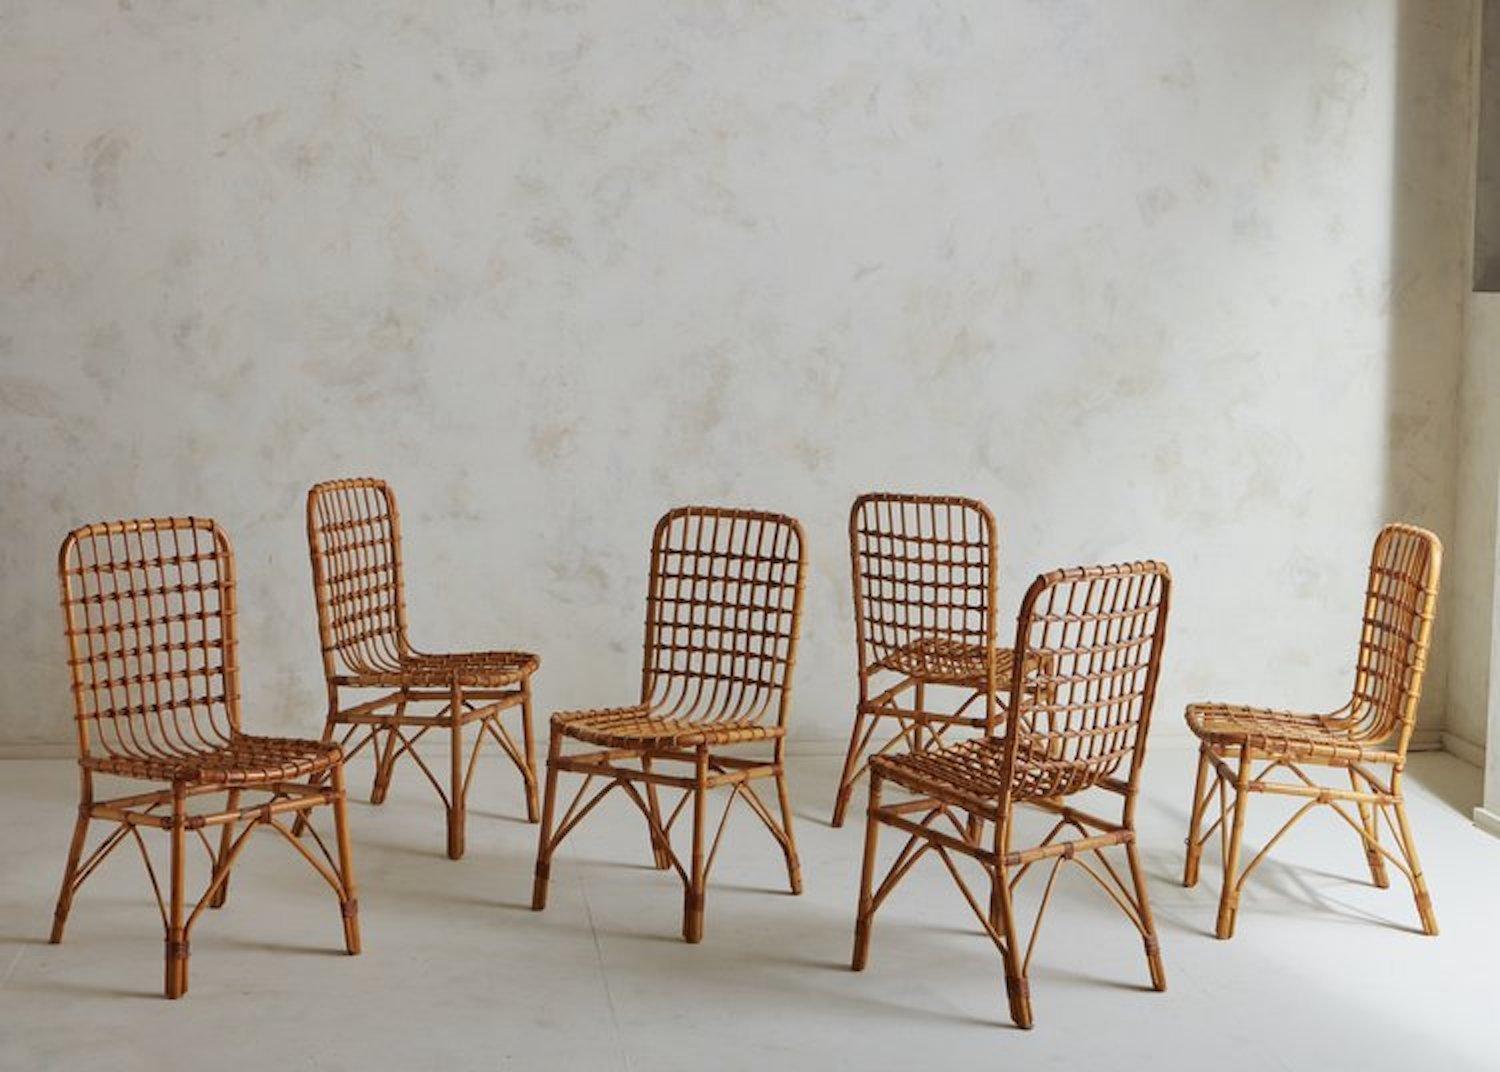 A set of 6 Mid-Century Italian dining chairs constructed with bamboo and rattan. These elegant chairs feature curved bamboo frames with widely woven seats and backs. We love the subtle color variations, warmth and durability of these natural